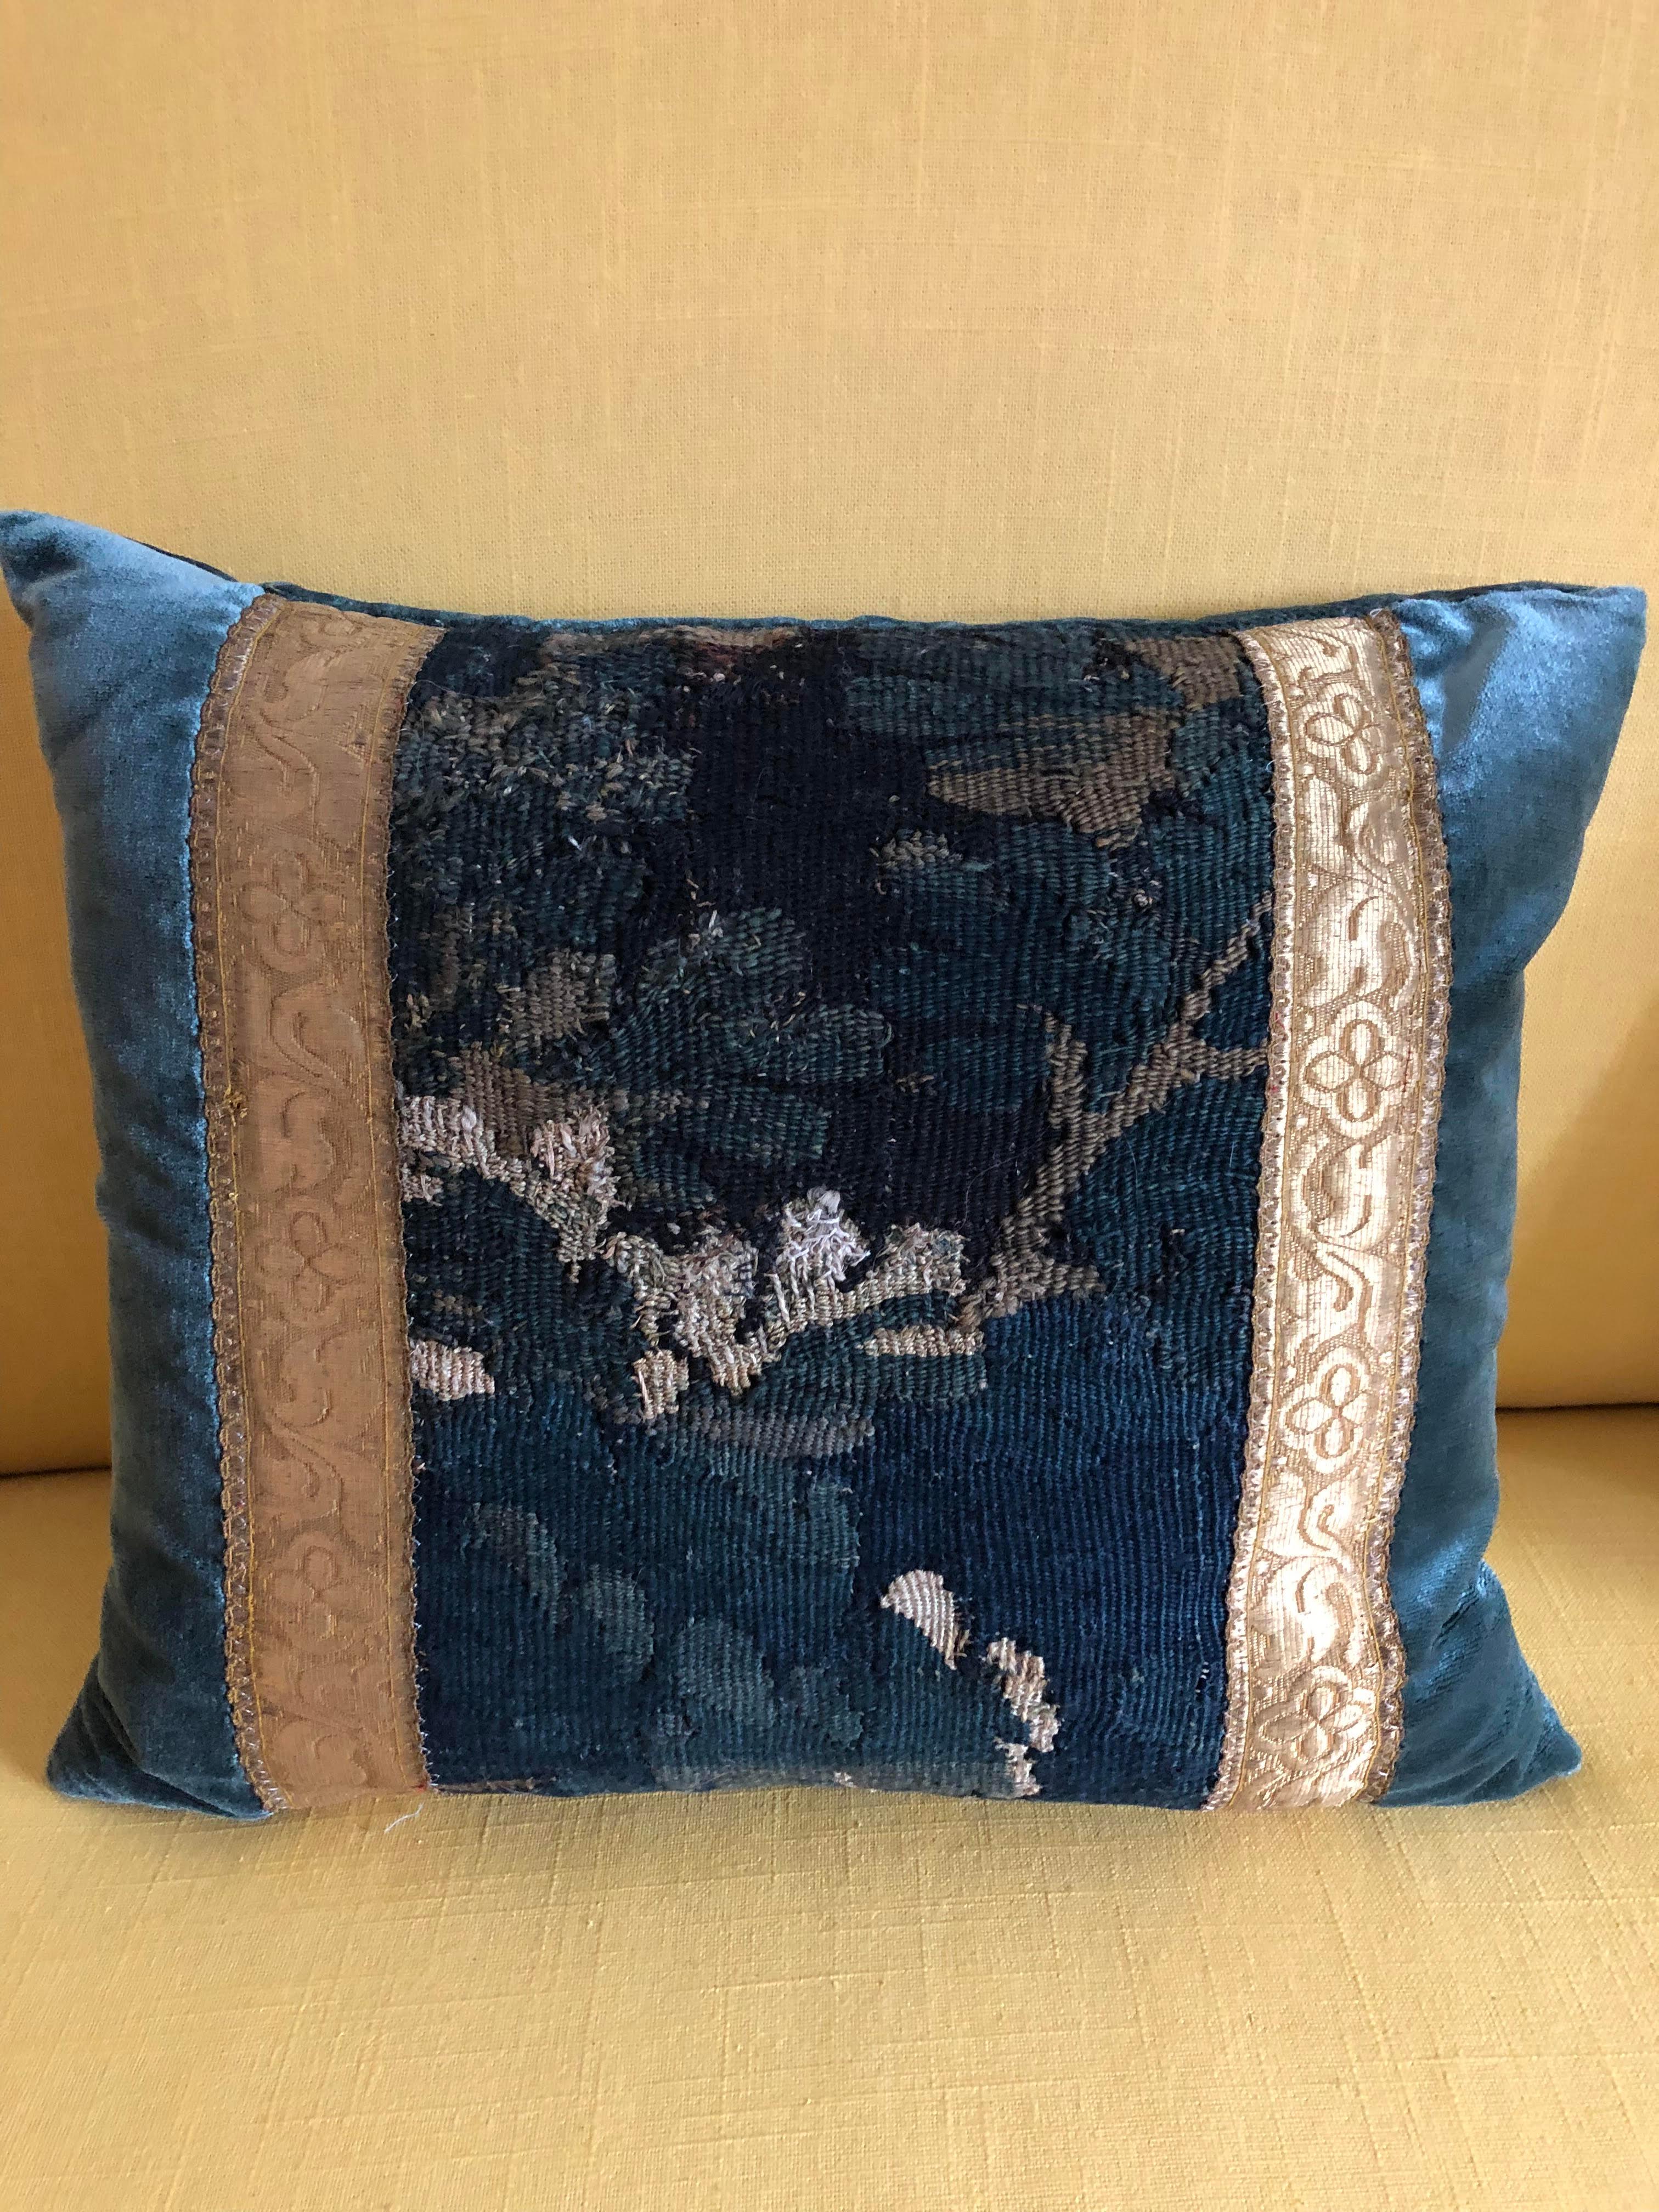 Gorgeous Schumacher silk velvet jewel-toned pillow with verdure tapestry piece framed by French gallon. Down filled.